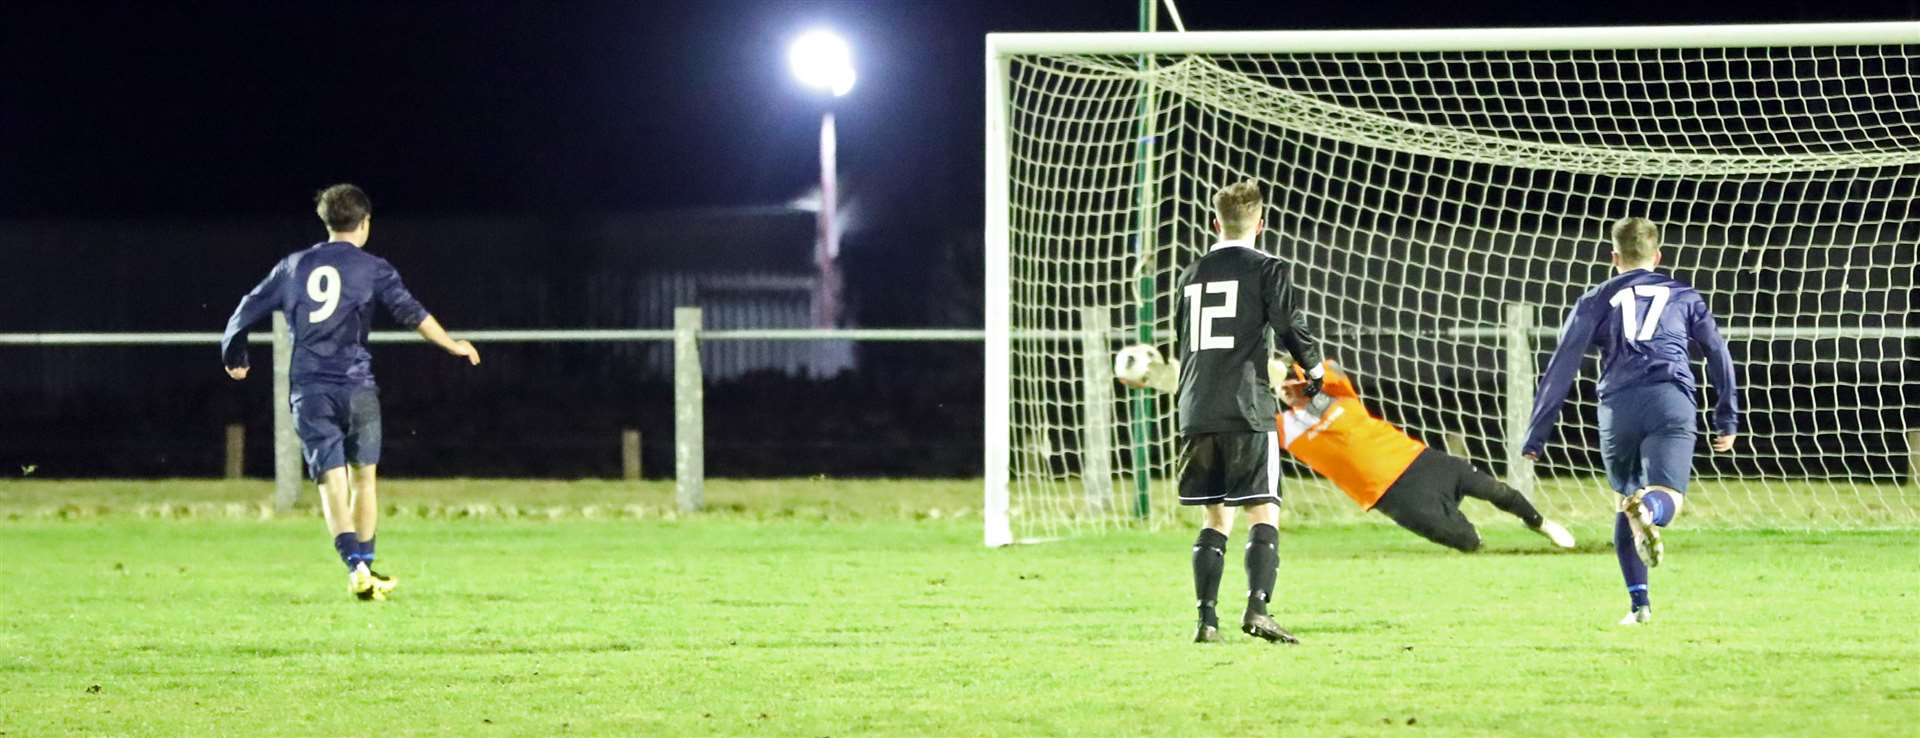 Graham MacNab fires his spot-kick past Thurso keeper Asa Sinclair to round off the scoring in Halkirk United's 4-1 win against Thurso on Tuesday night. Picture: James Gunn